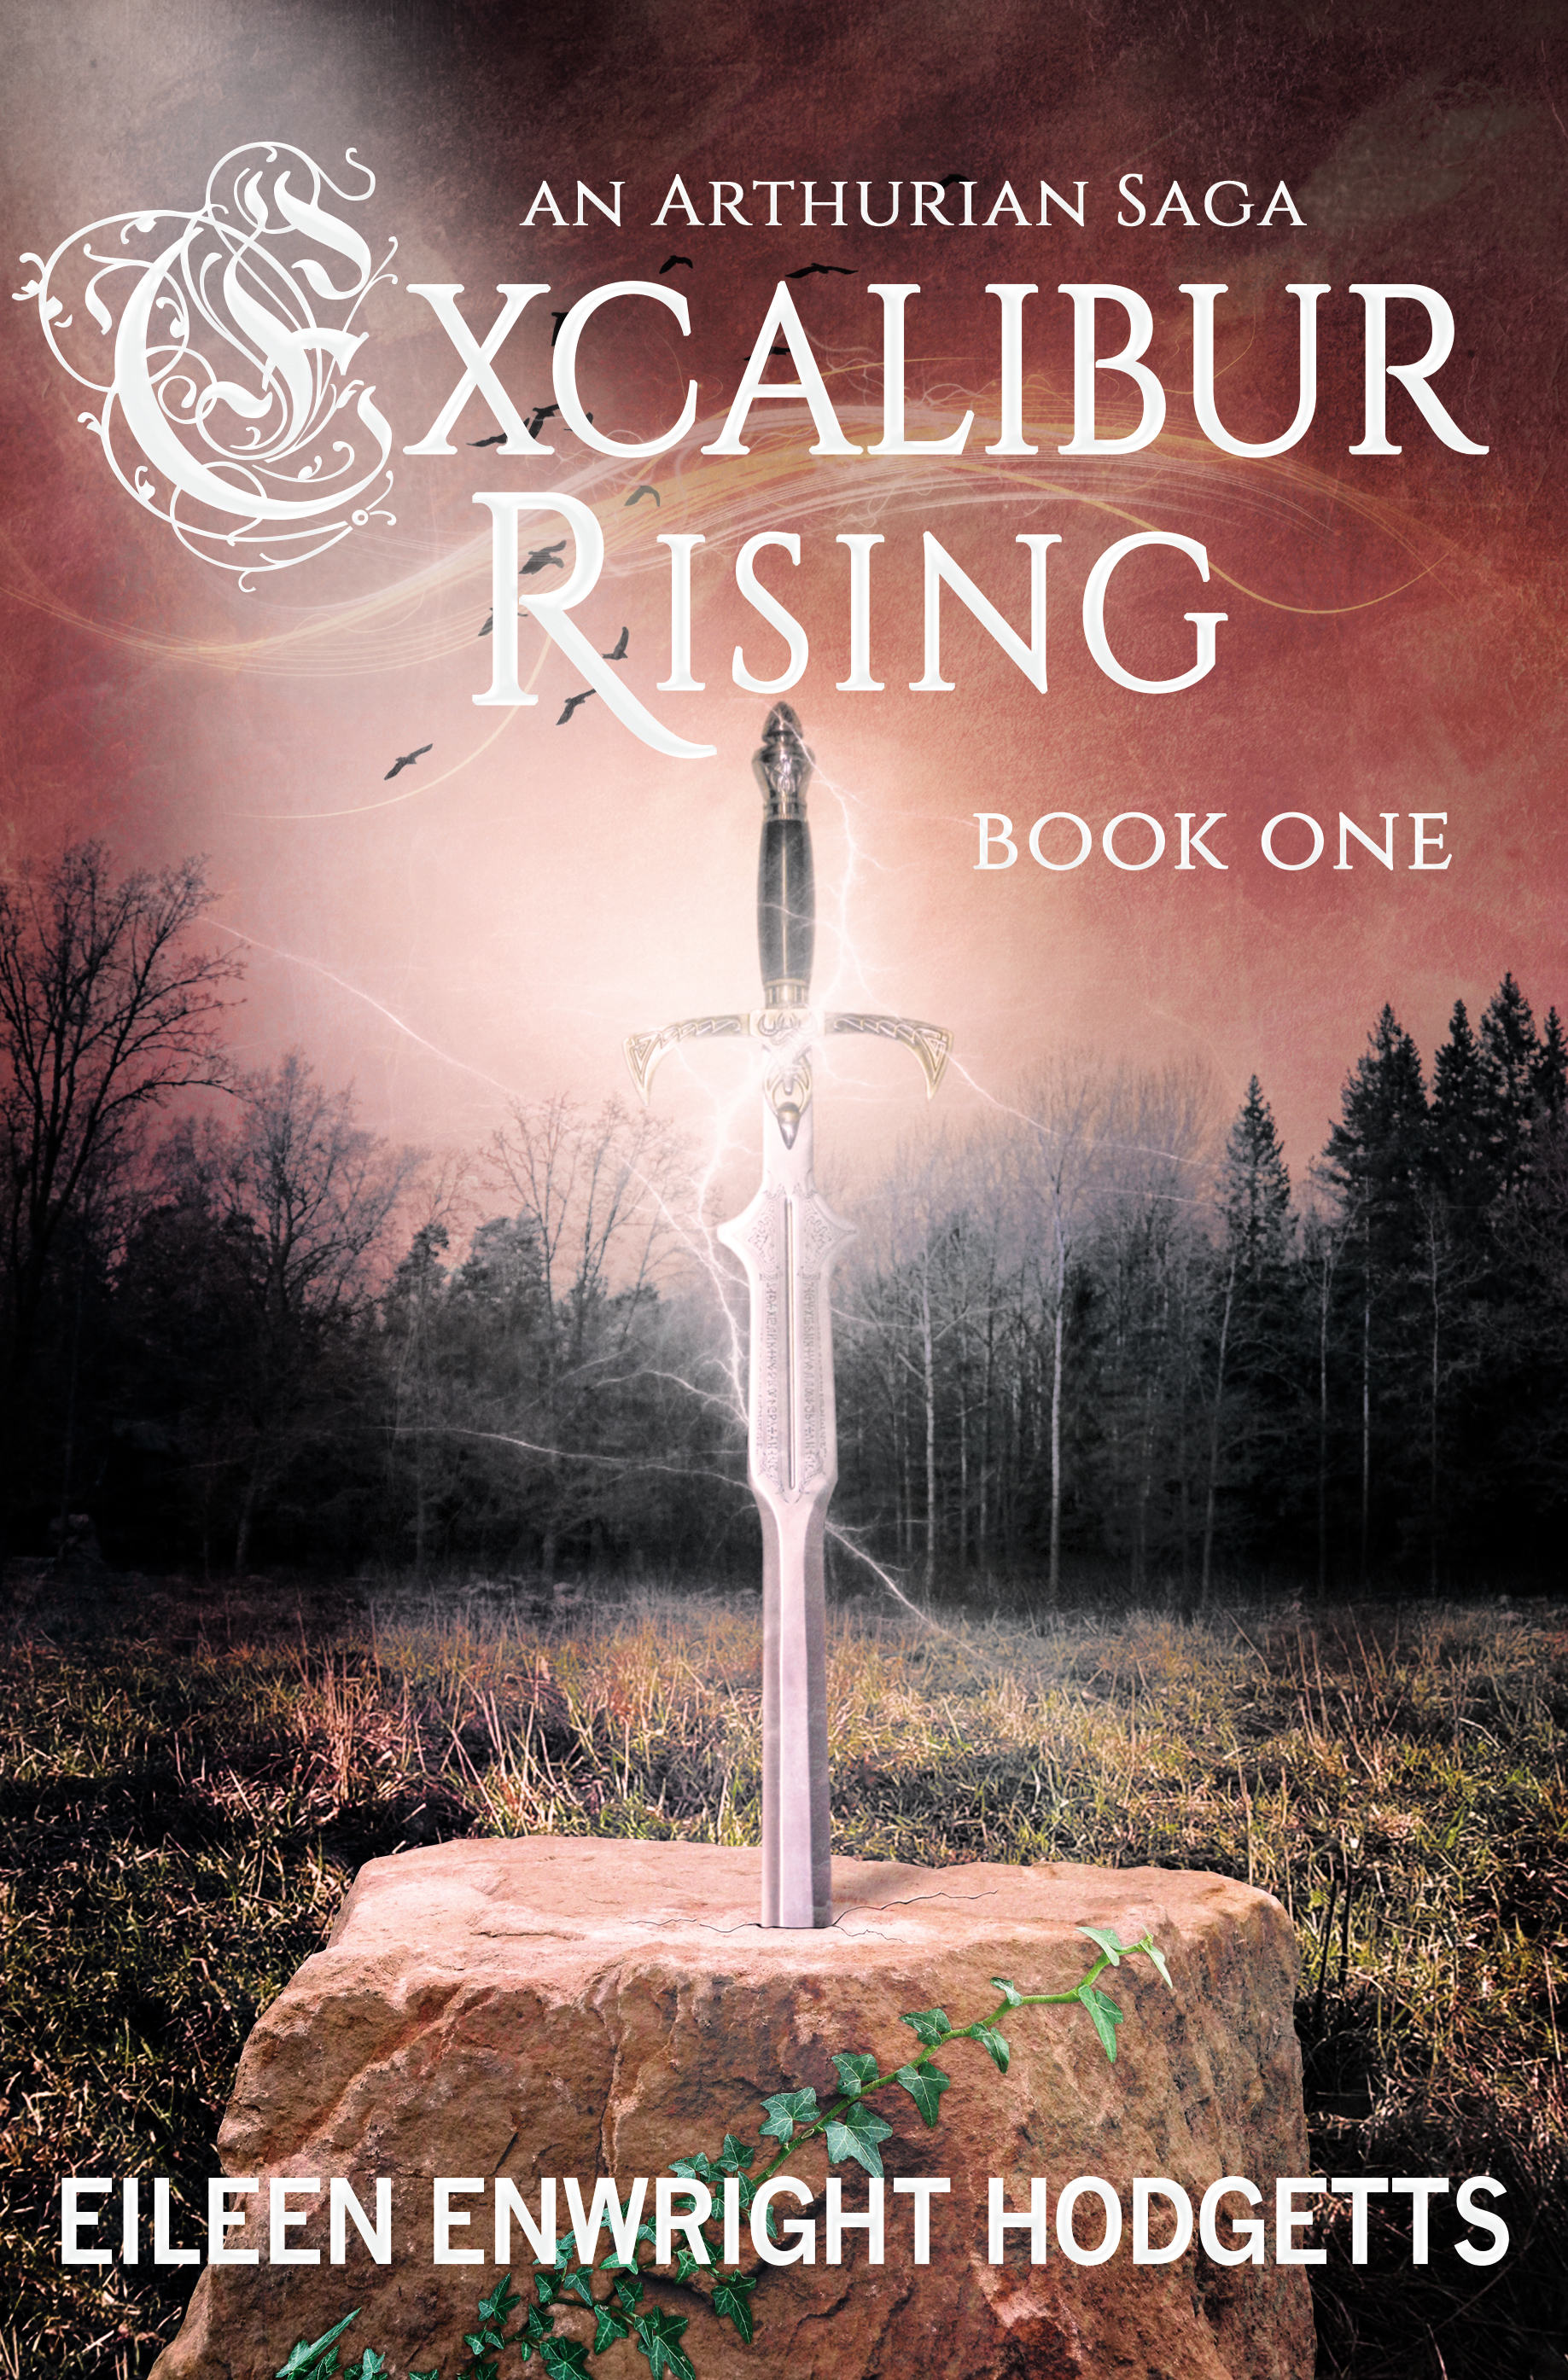 FREE: Excalibur Rising: Book One of an Arthurian Saga by Eileen Enwright Hodgetts